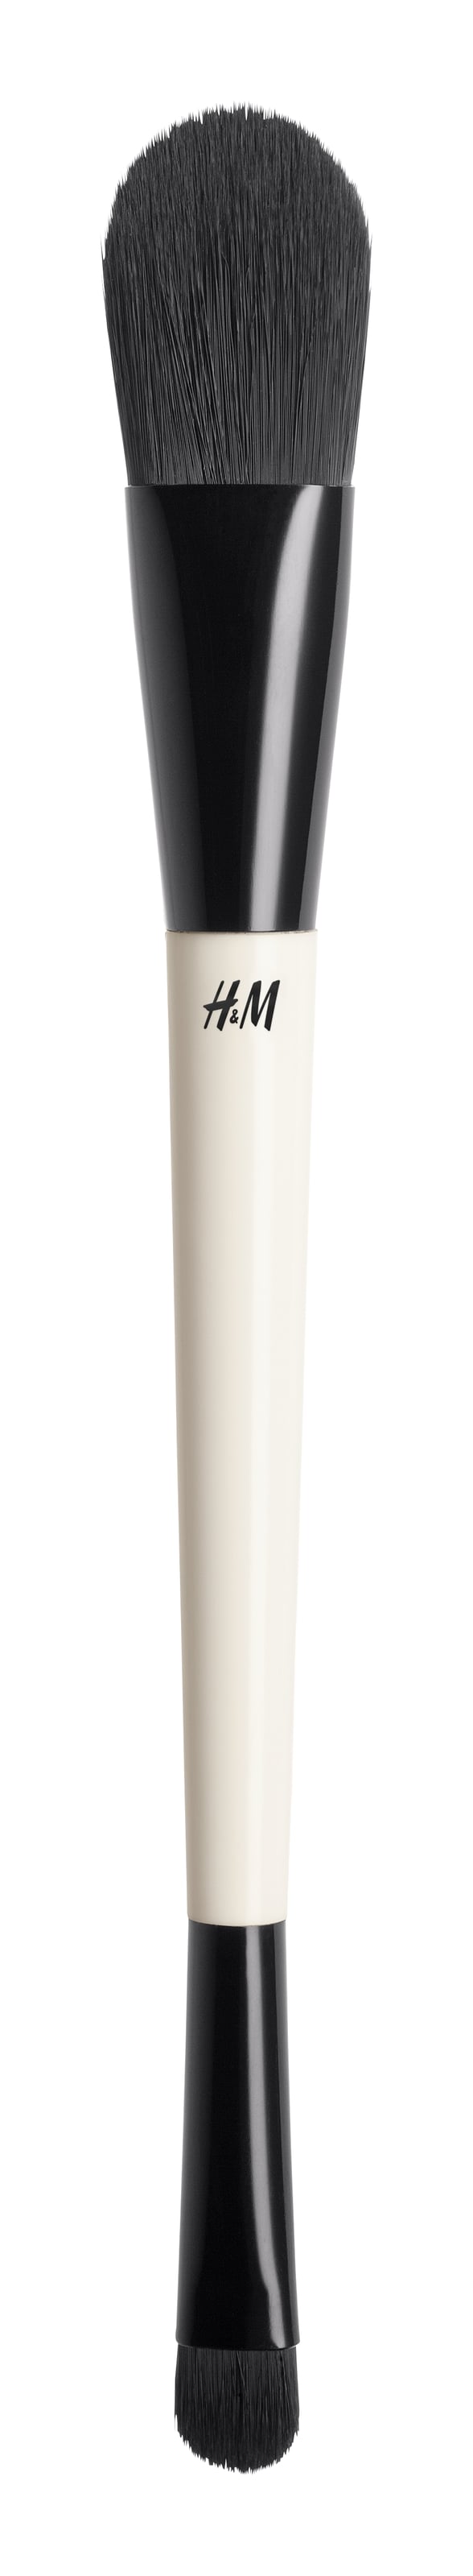 H&M Beauty Foundation and Concealer Brush